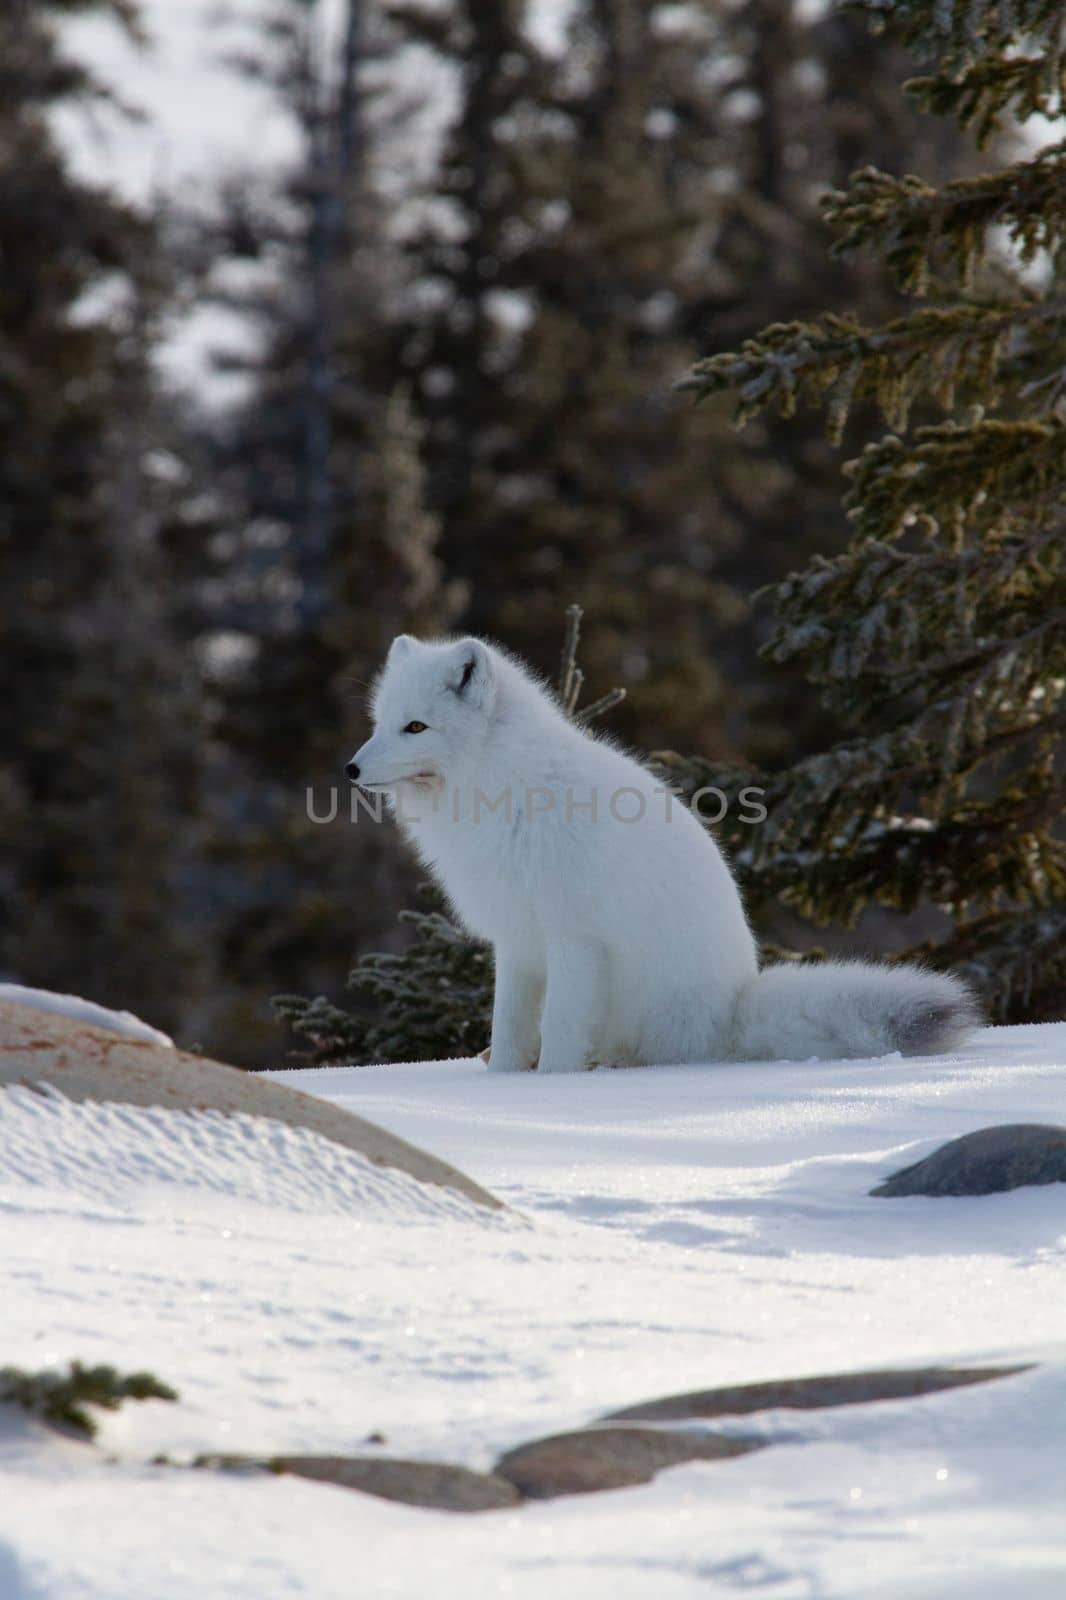 Arctic fox or Vulpes Lagopus ready for the next hunt while sitting on snow by Granchinho